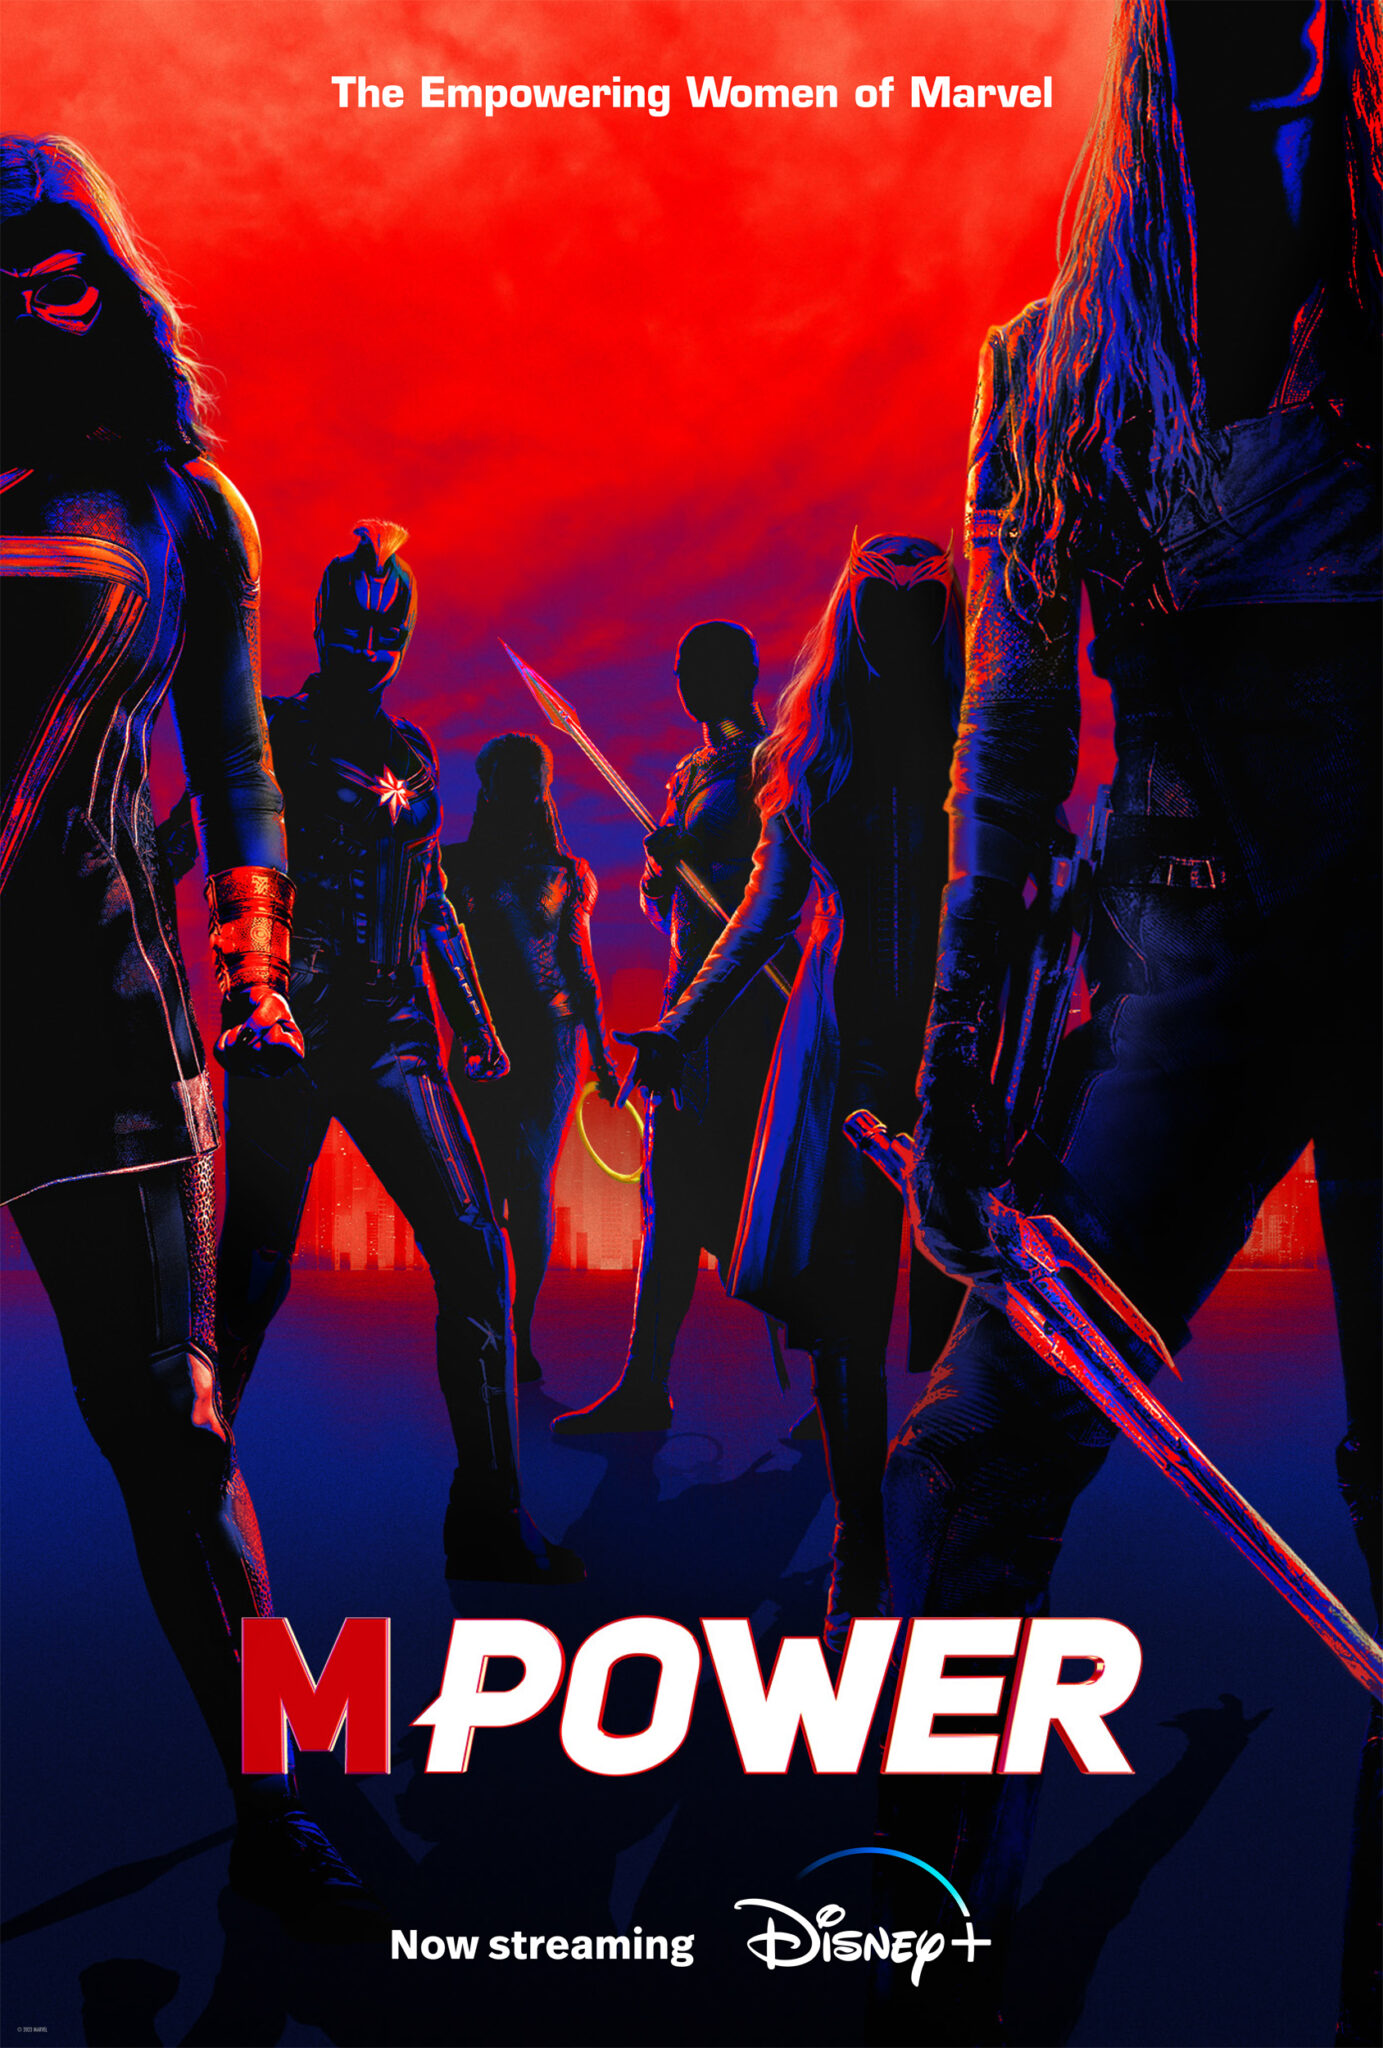 MPower Series Debuts on International Woman's Day on Disney+